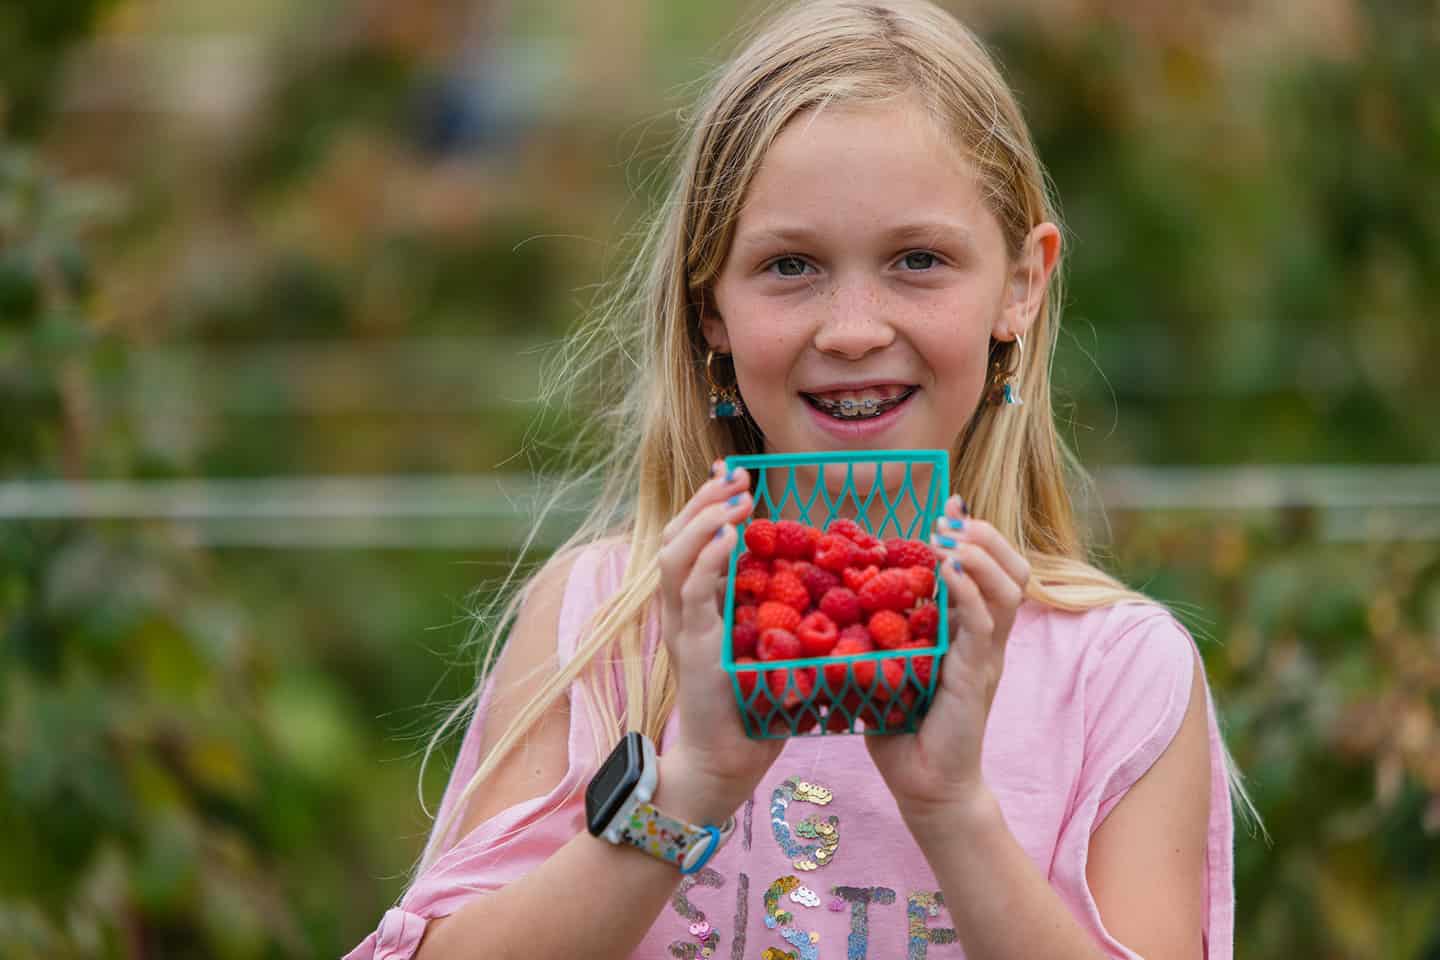 A young girl holding a basket of raspberries